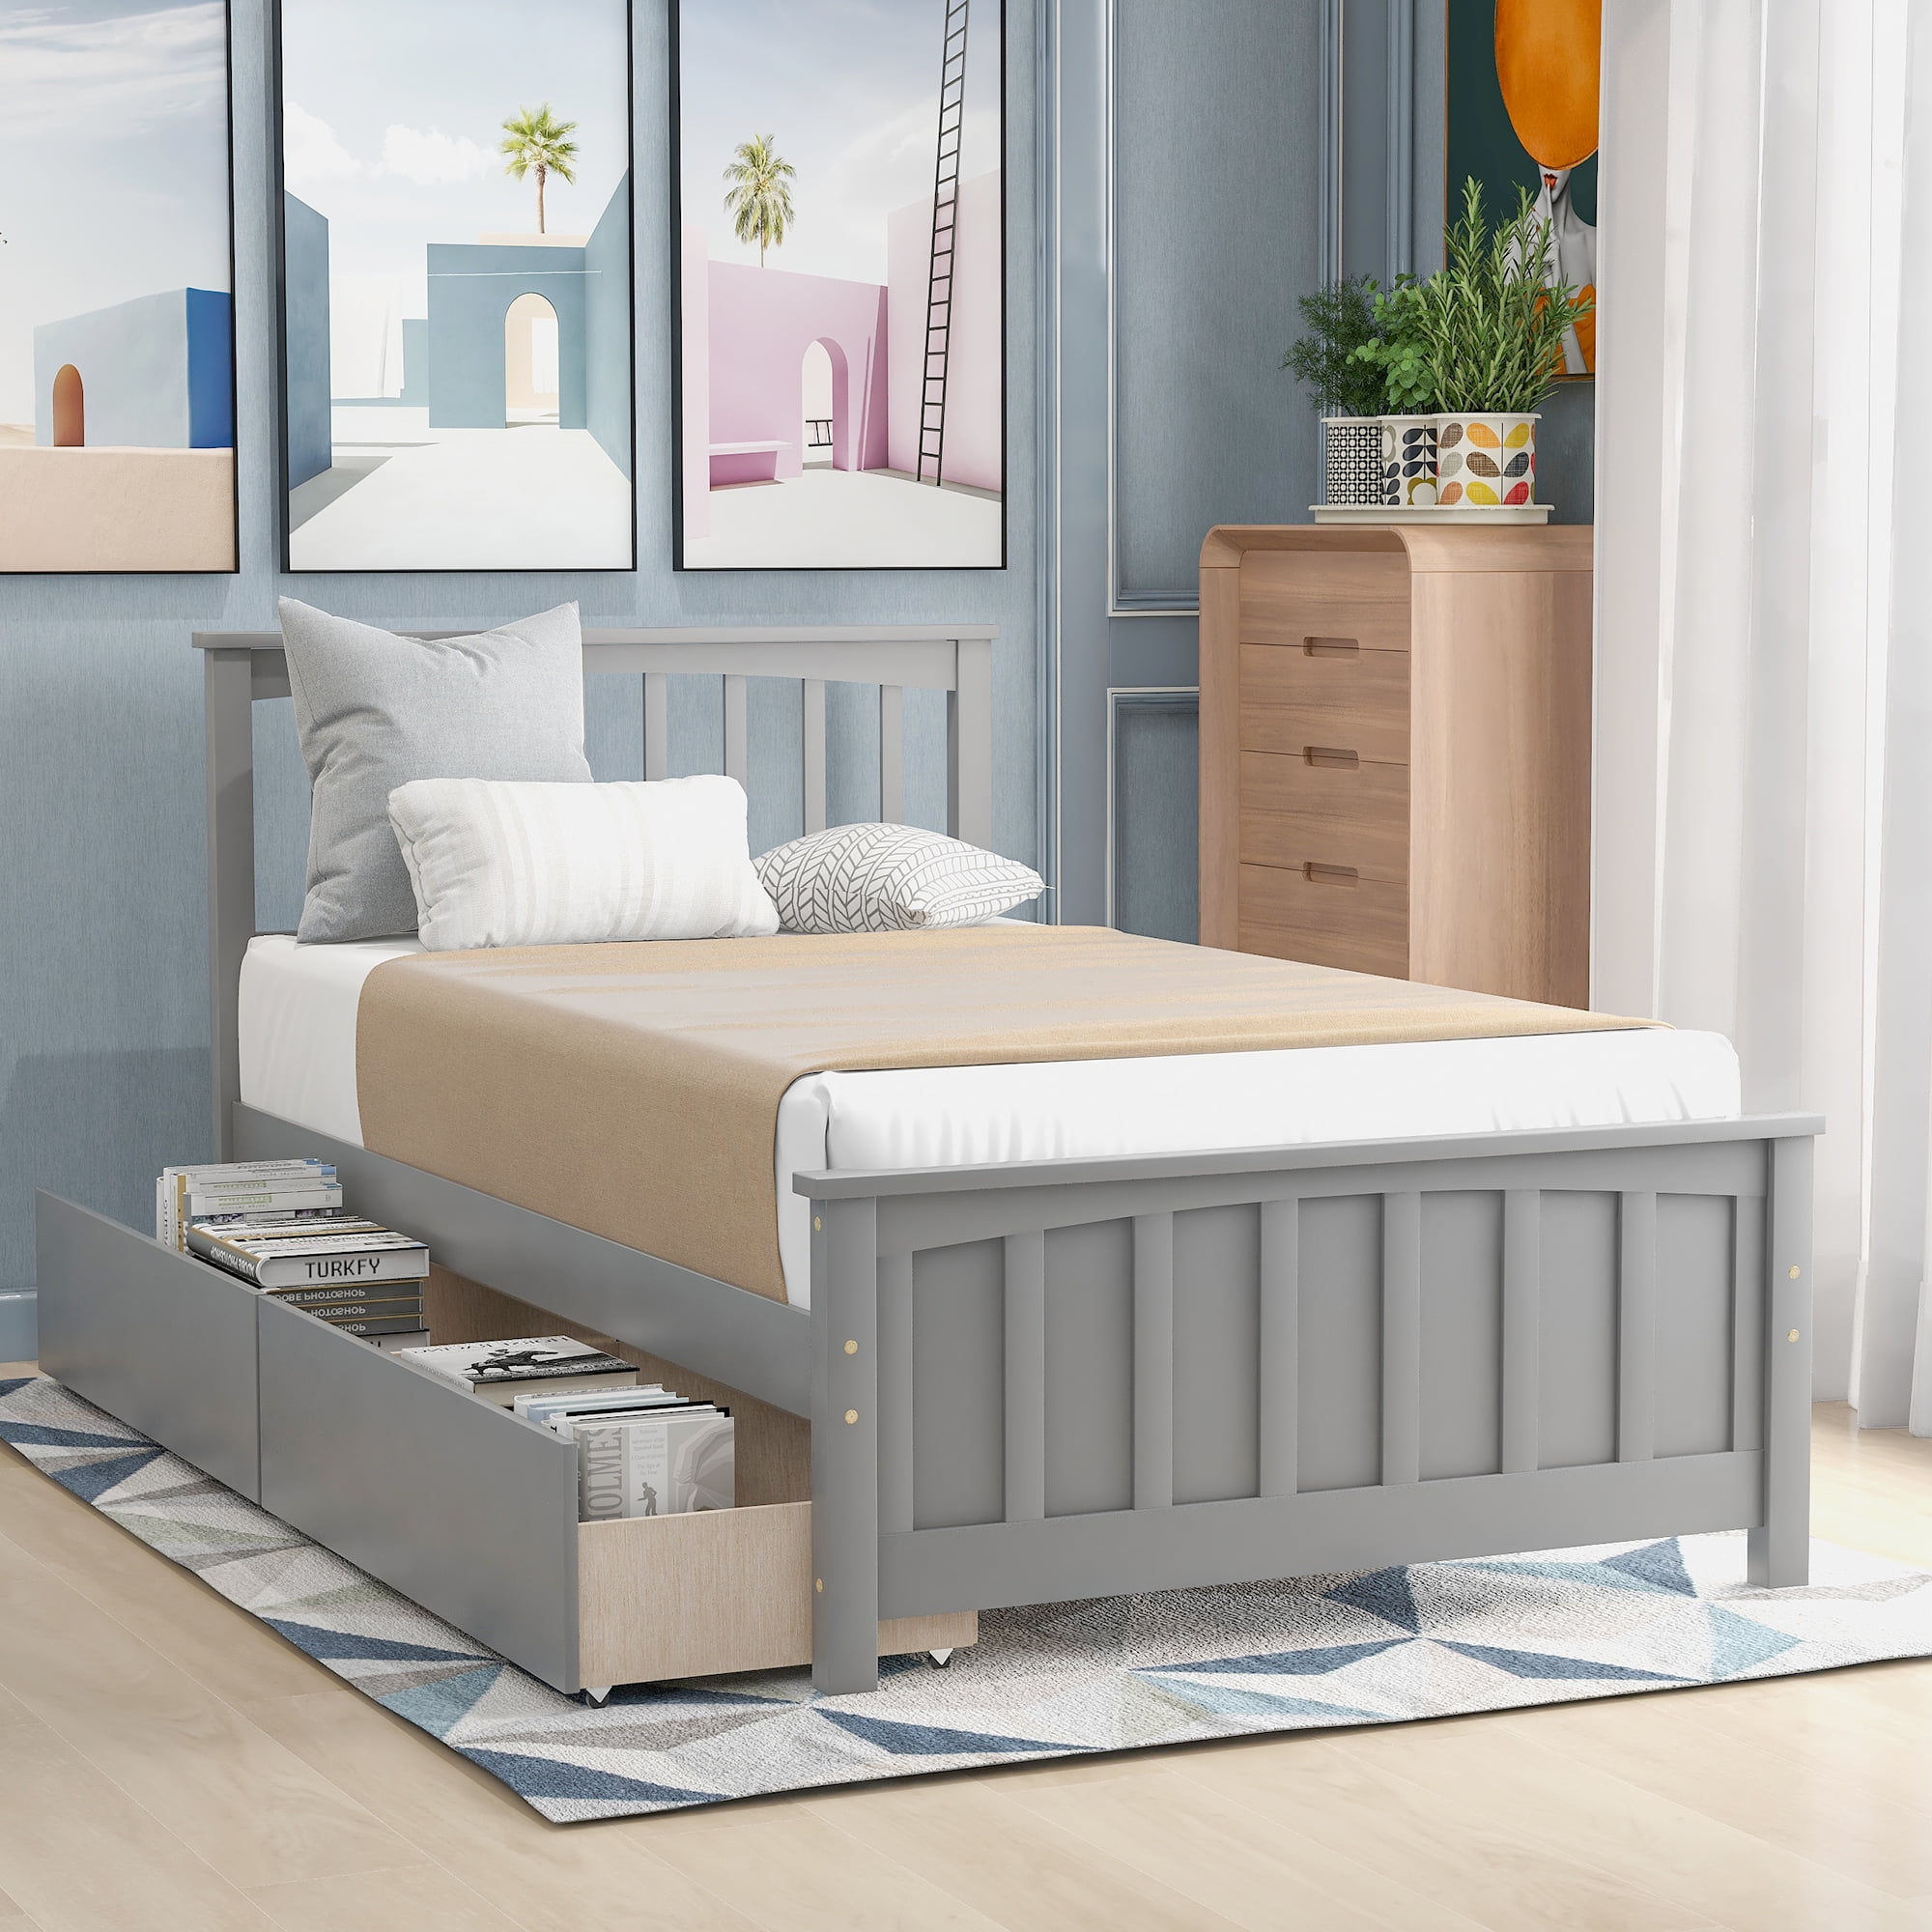 Twin size Platform Bed with Two Drawers, Gray - Walmart.com